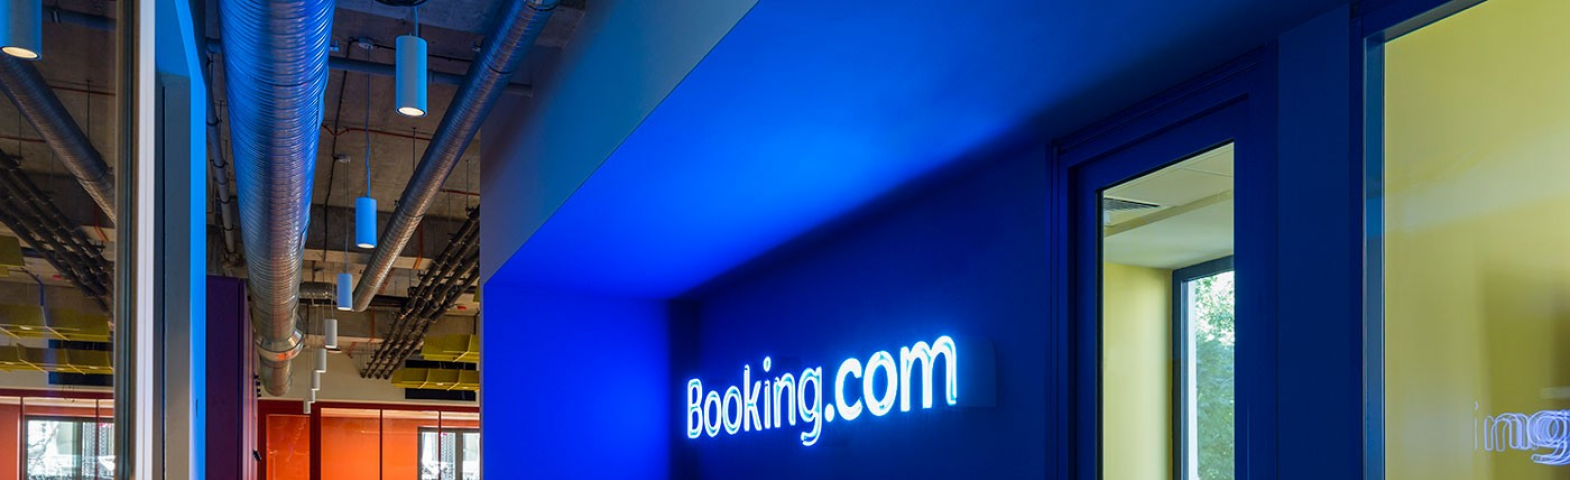 Booking.com's New Office in Tbilisi